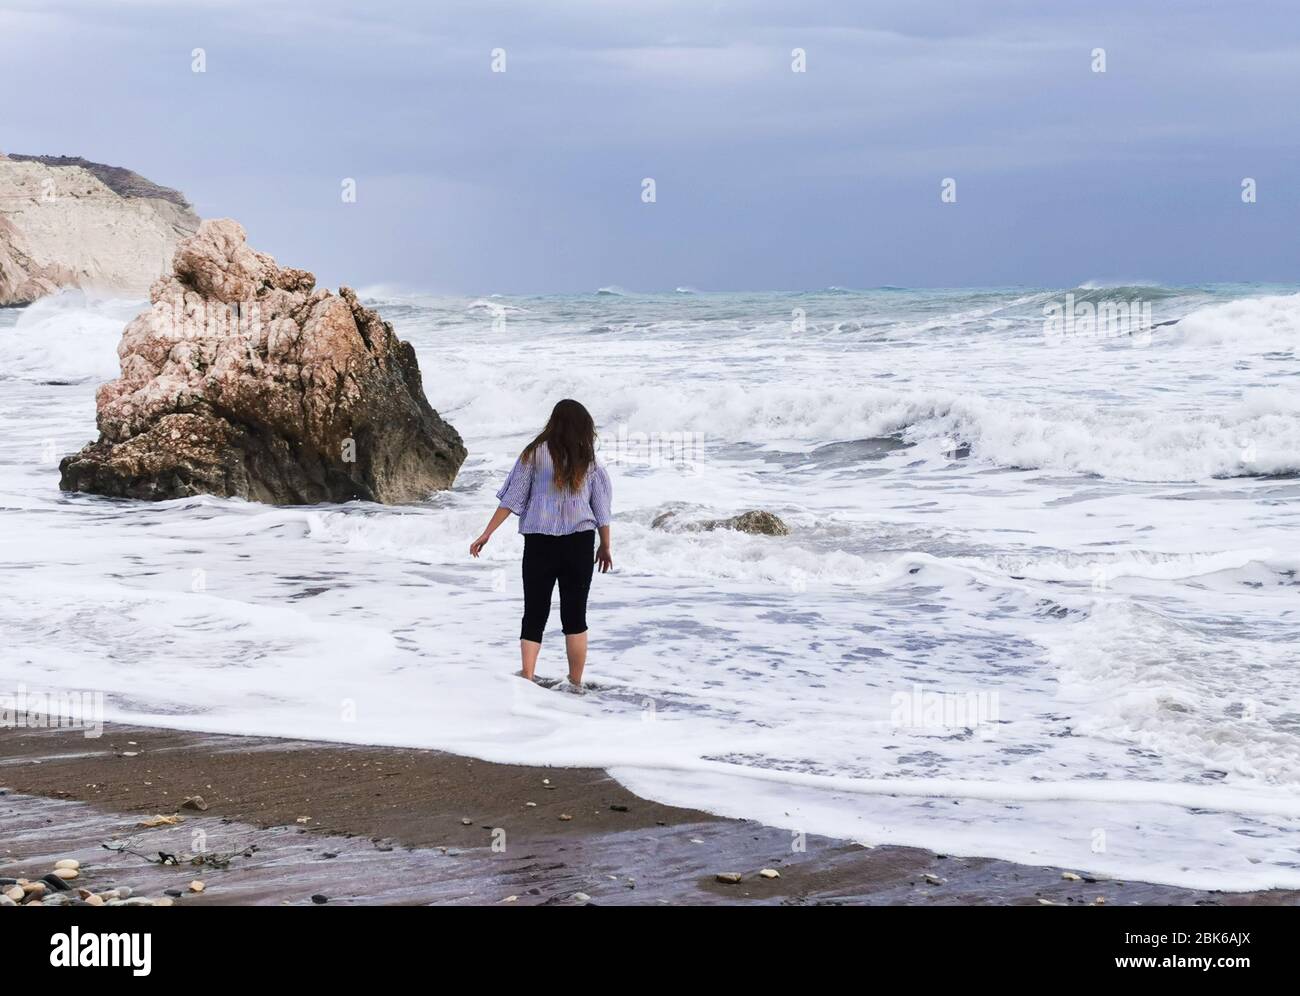 Unrecognized person enjoying the stormy seascape with windy waves. Rock of Aphrodite birthplace, Petra tou romiou coastline at Paphos area in Cyprus Stock Photo